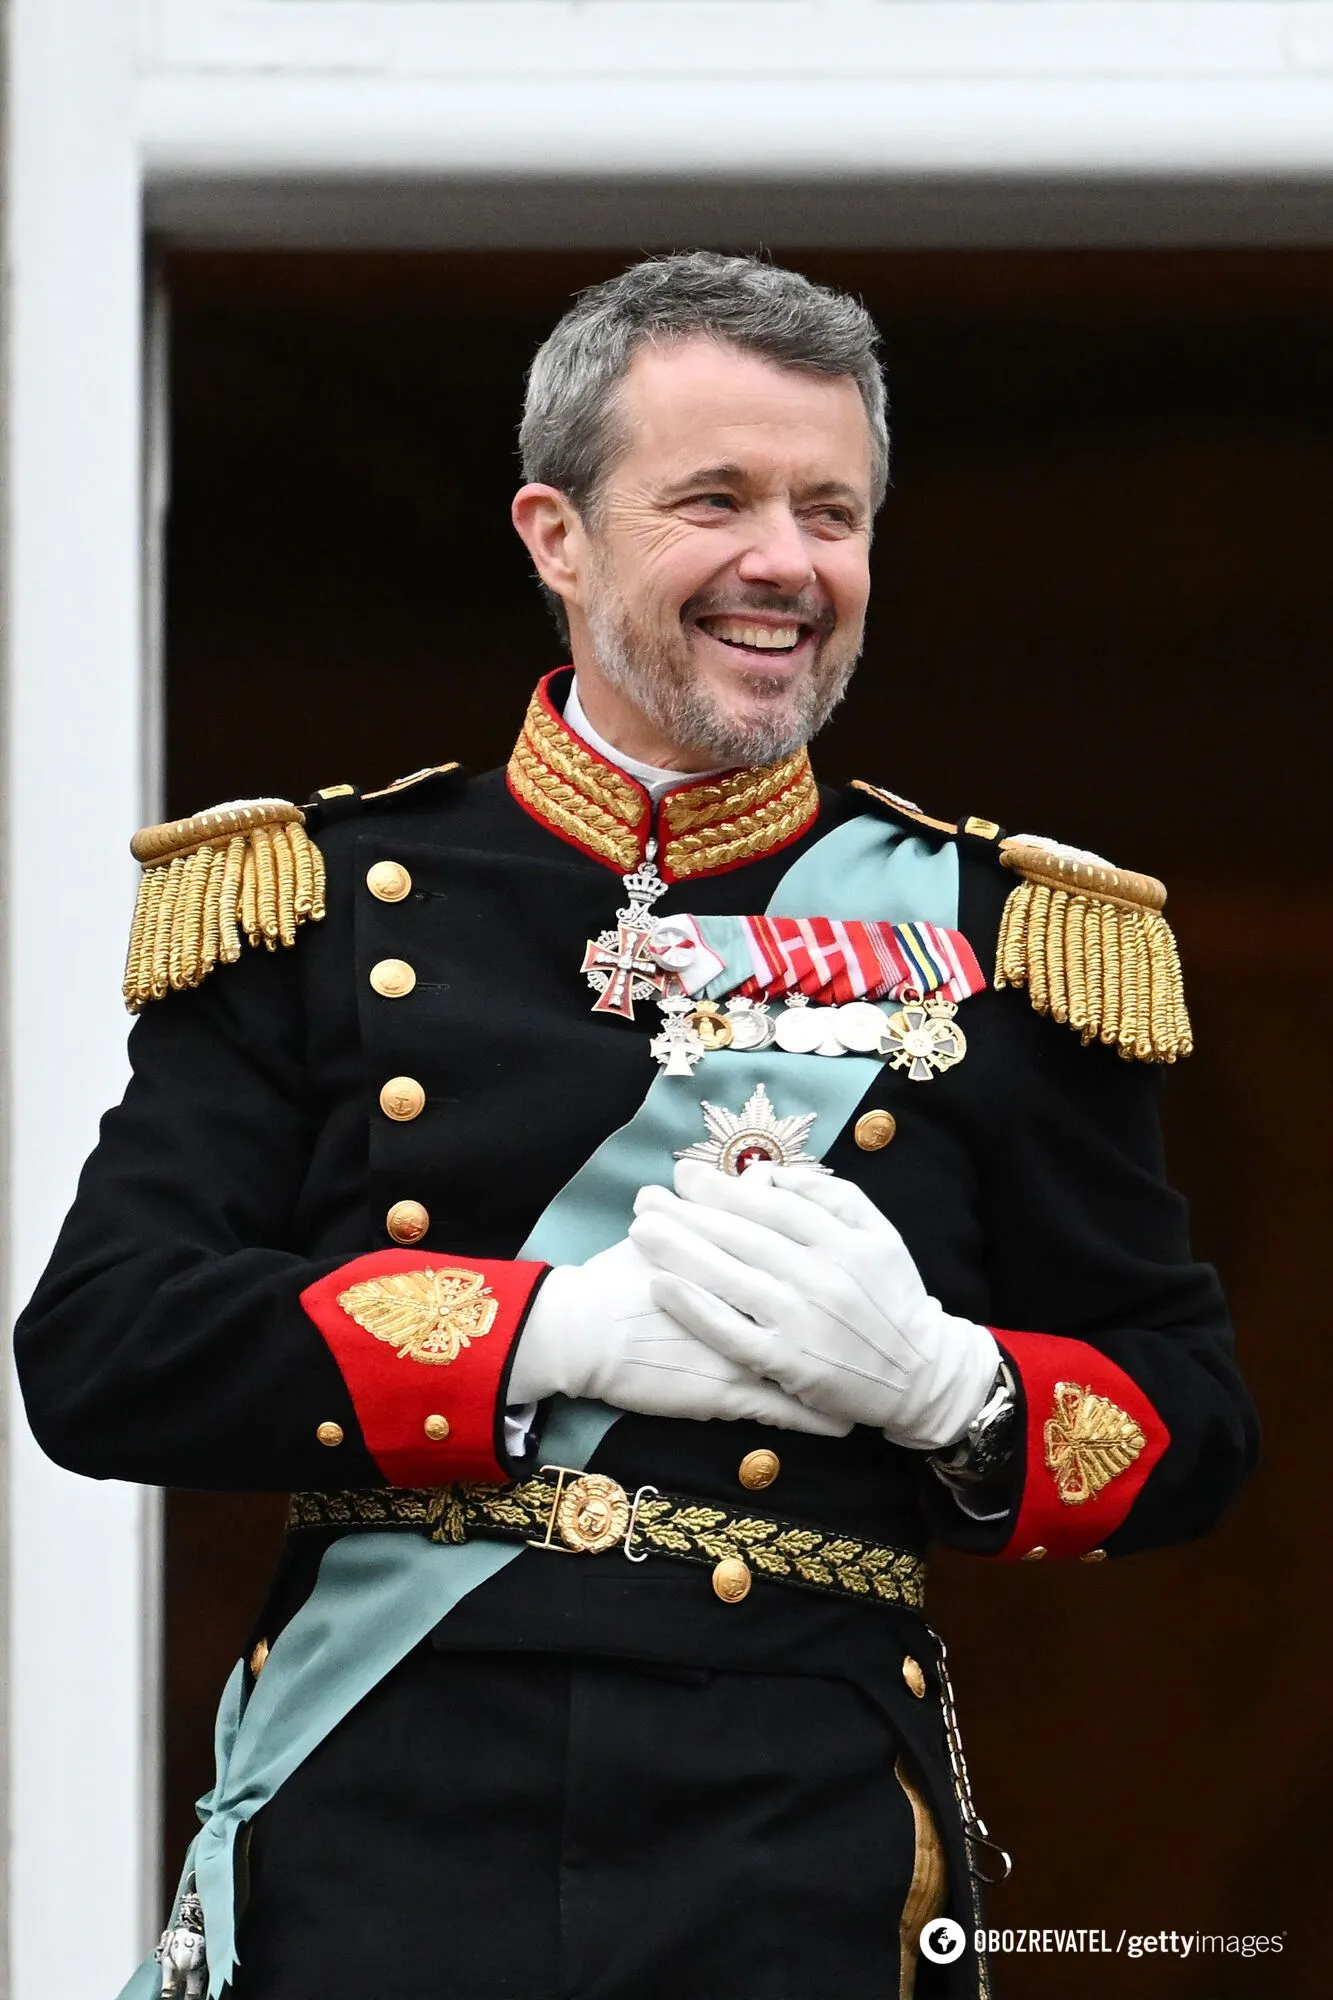 He was considered a playboy and accused of treason: what is known about the new King of Denmark, Frederik X, whose mother abdicated the throne. Photo